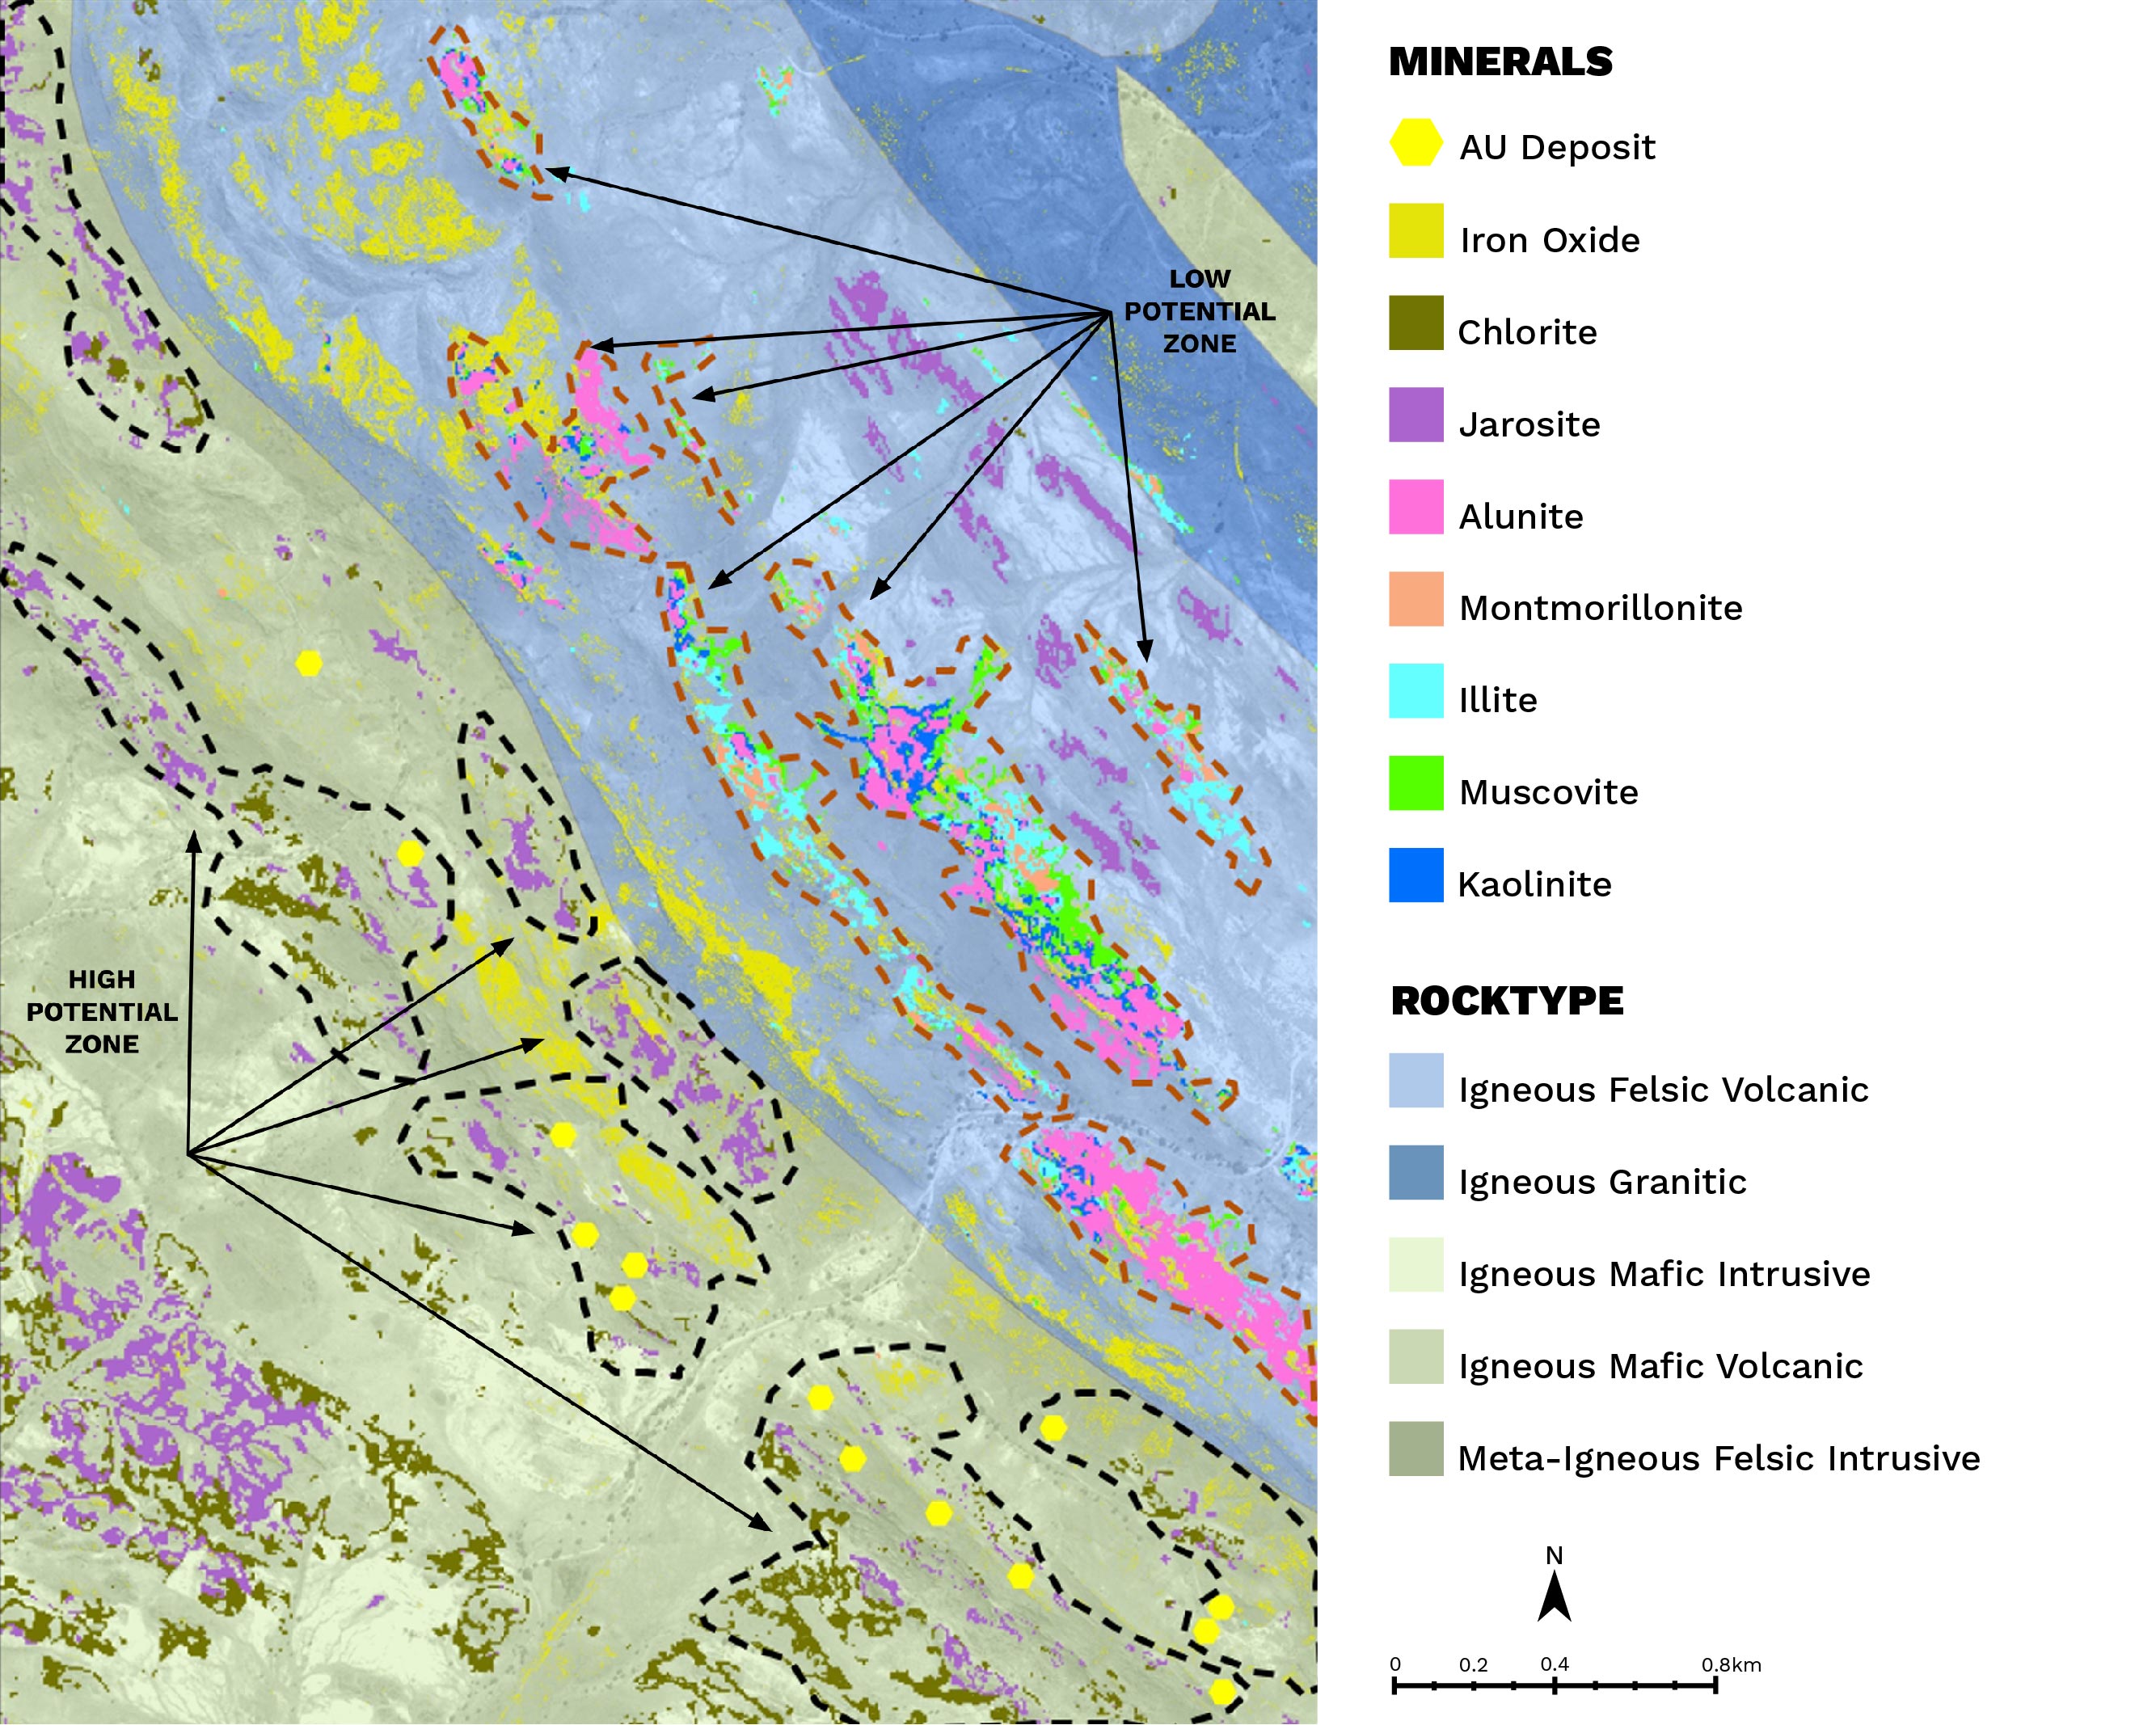 The final mineral map indicates the high and low potential zones for AU